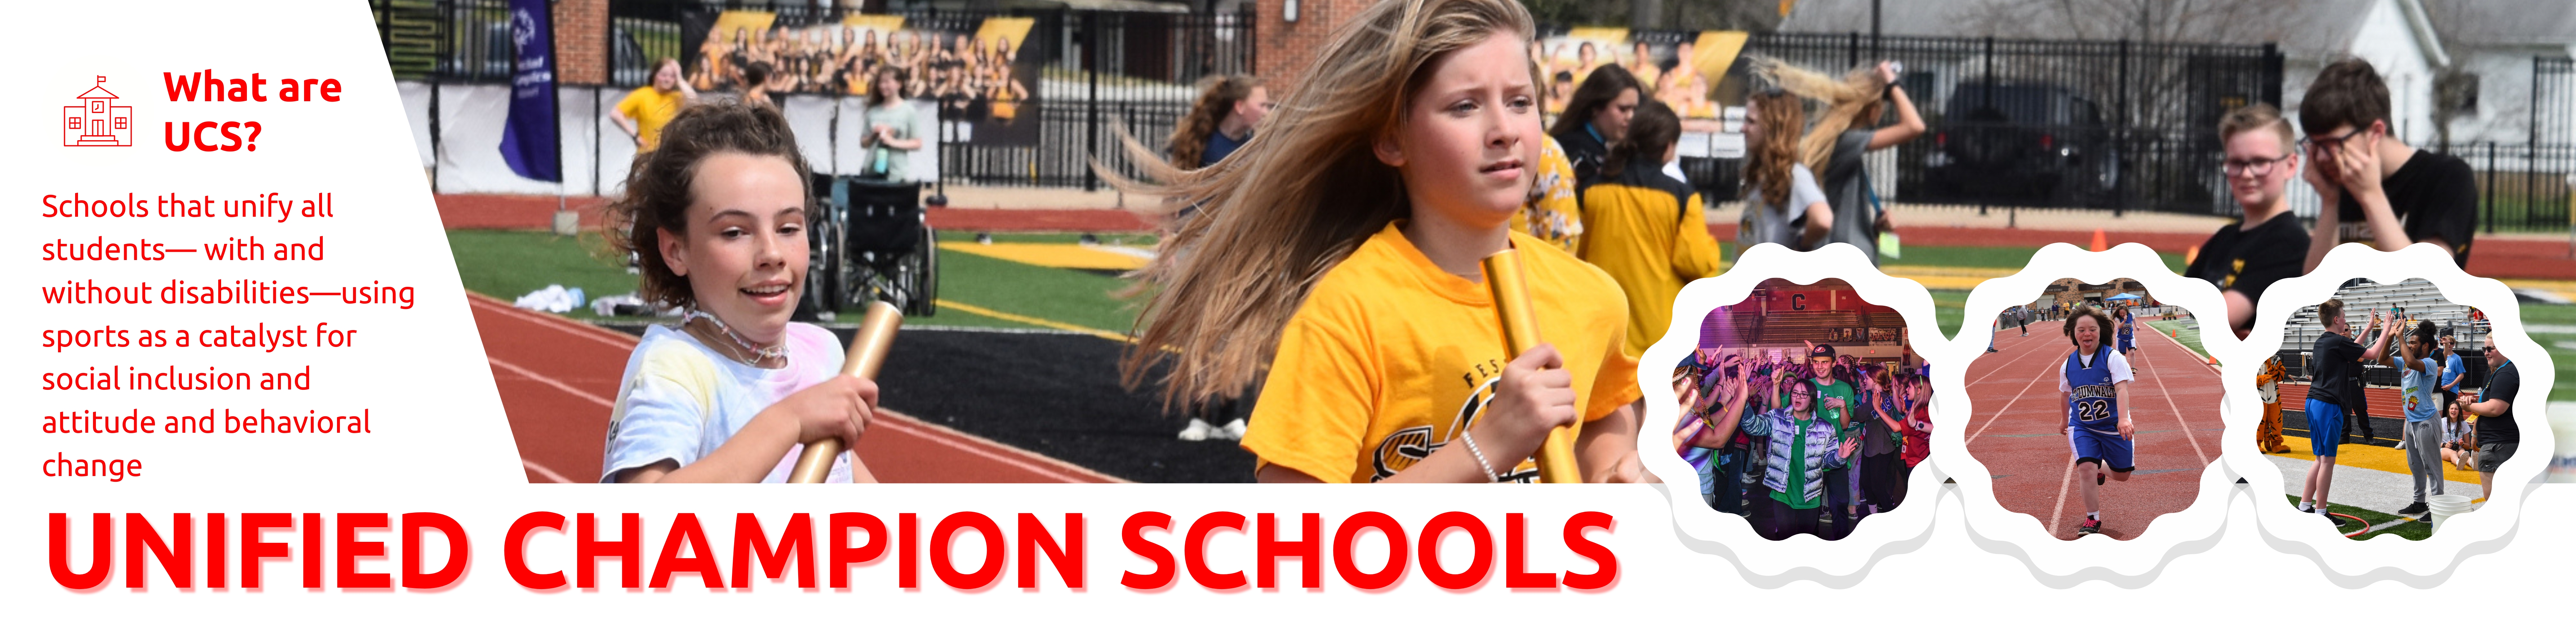 Unified Champion Schools Web Banner